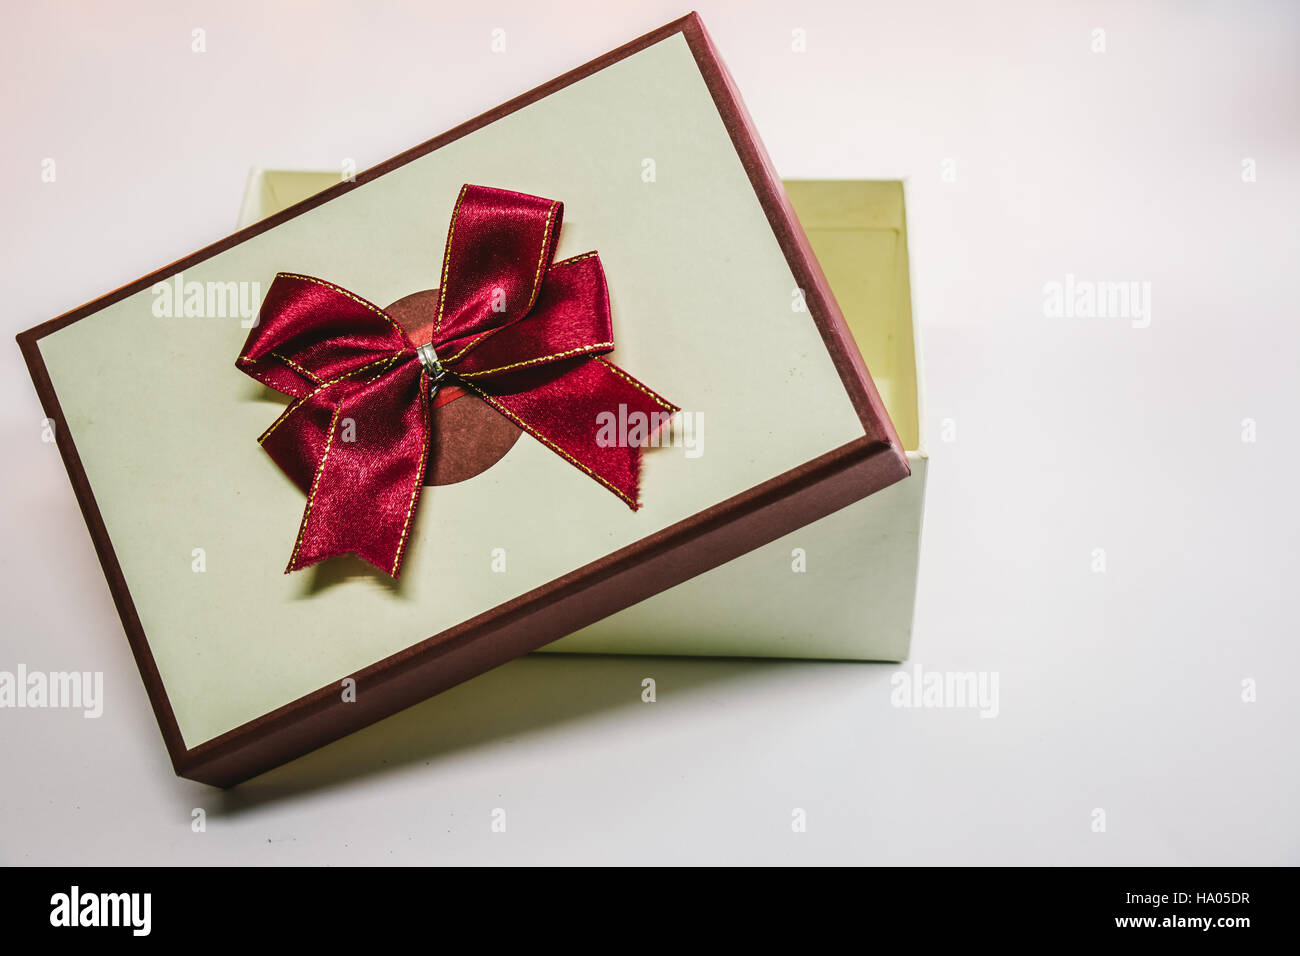 Present box with Ornament and Christmas items decorate for the holy night. Merry xmas and happy new year night light. Stock Photo